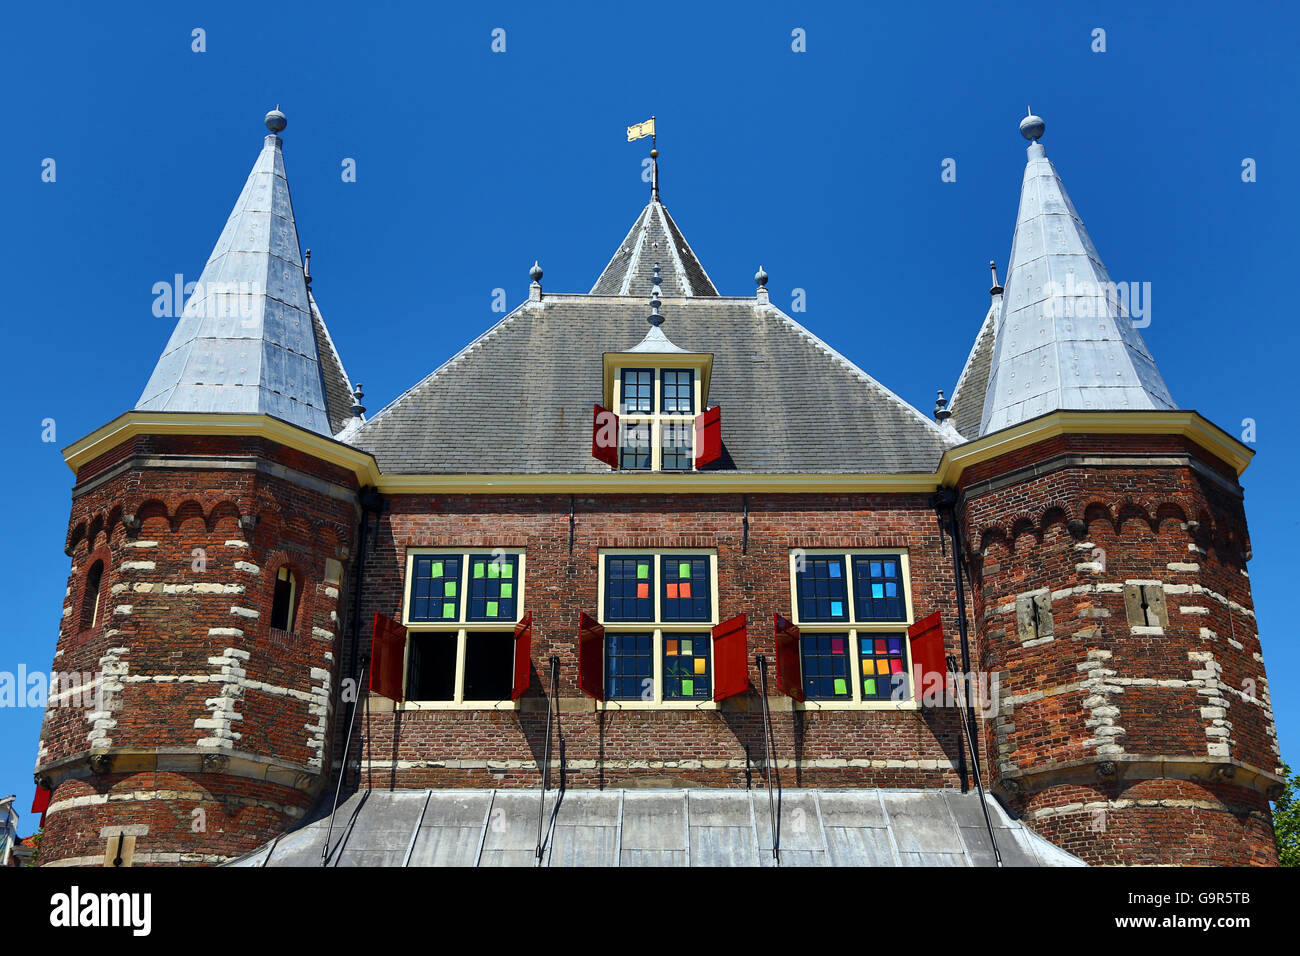 In De Waag, 15th century city gate which is now a restaurant in Nieuwmarkt Square, in Amsterdam, Holland Stock Photo